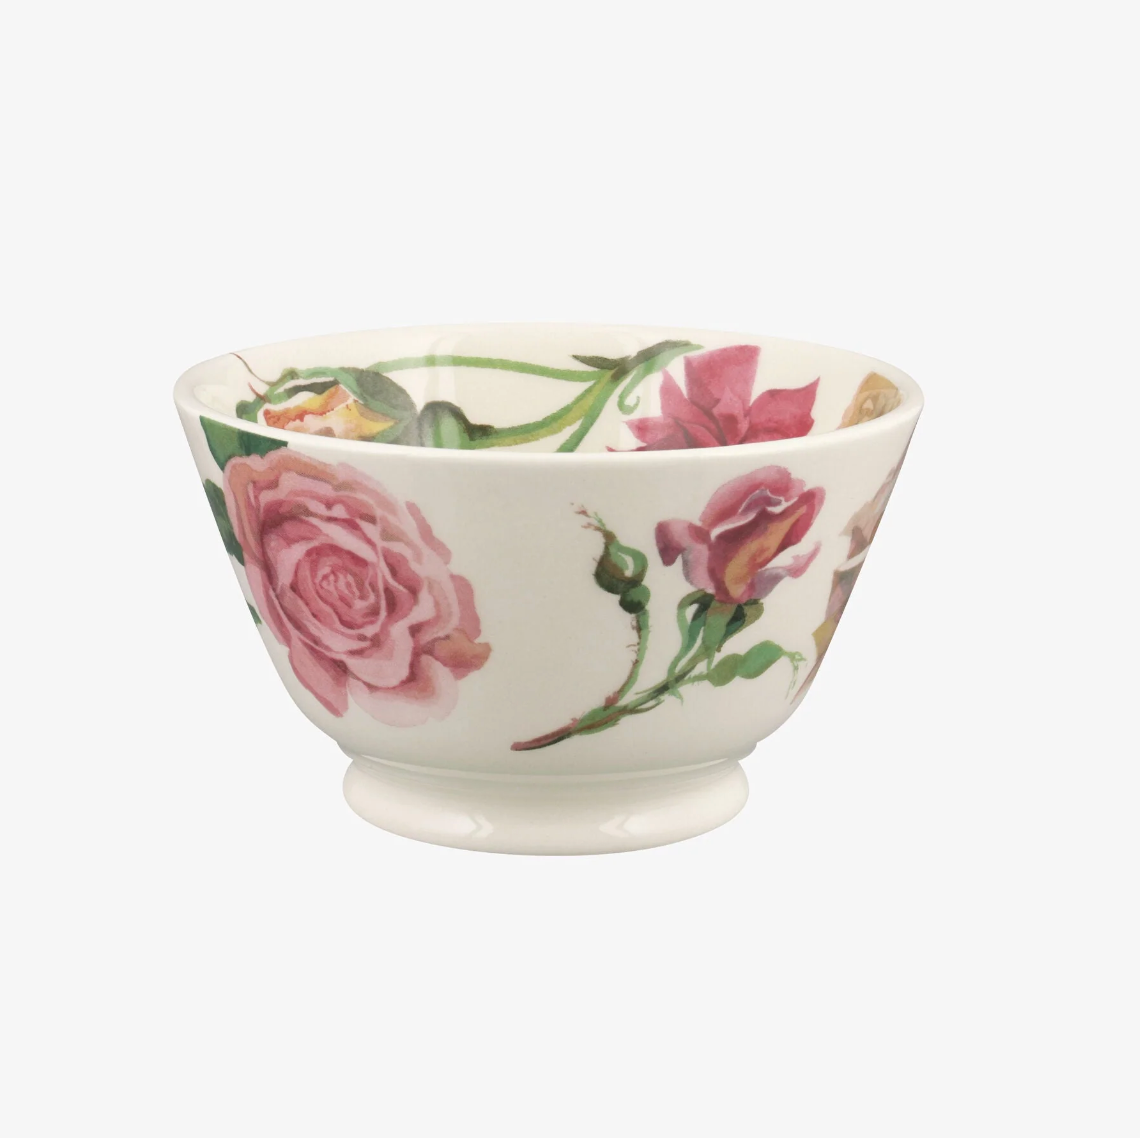 Emma Bridgewater Roses All My Life Small Old Bowl